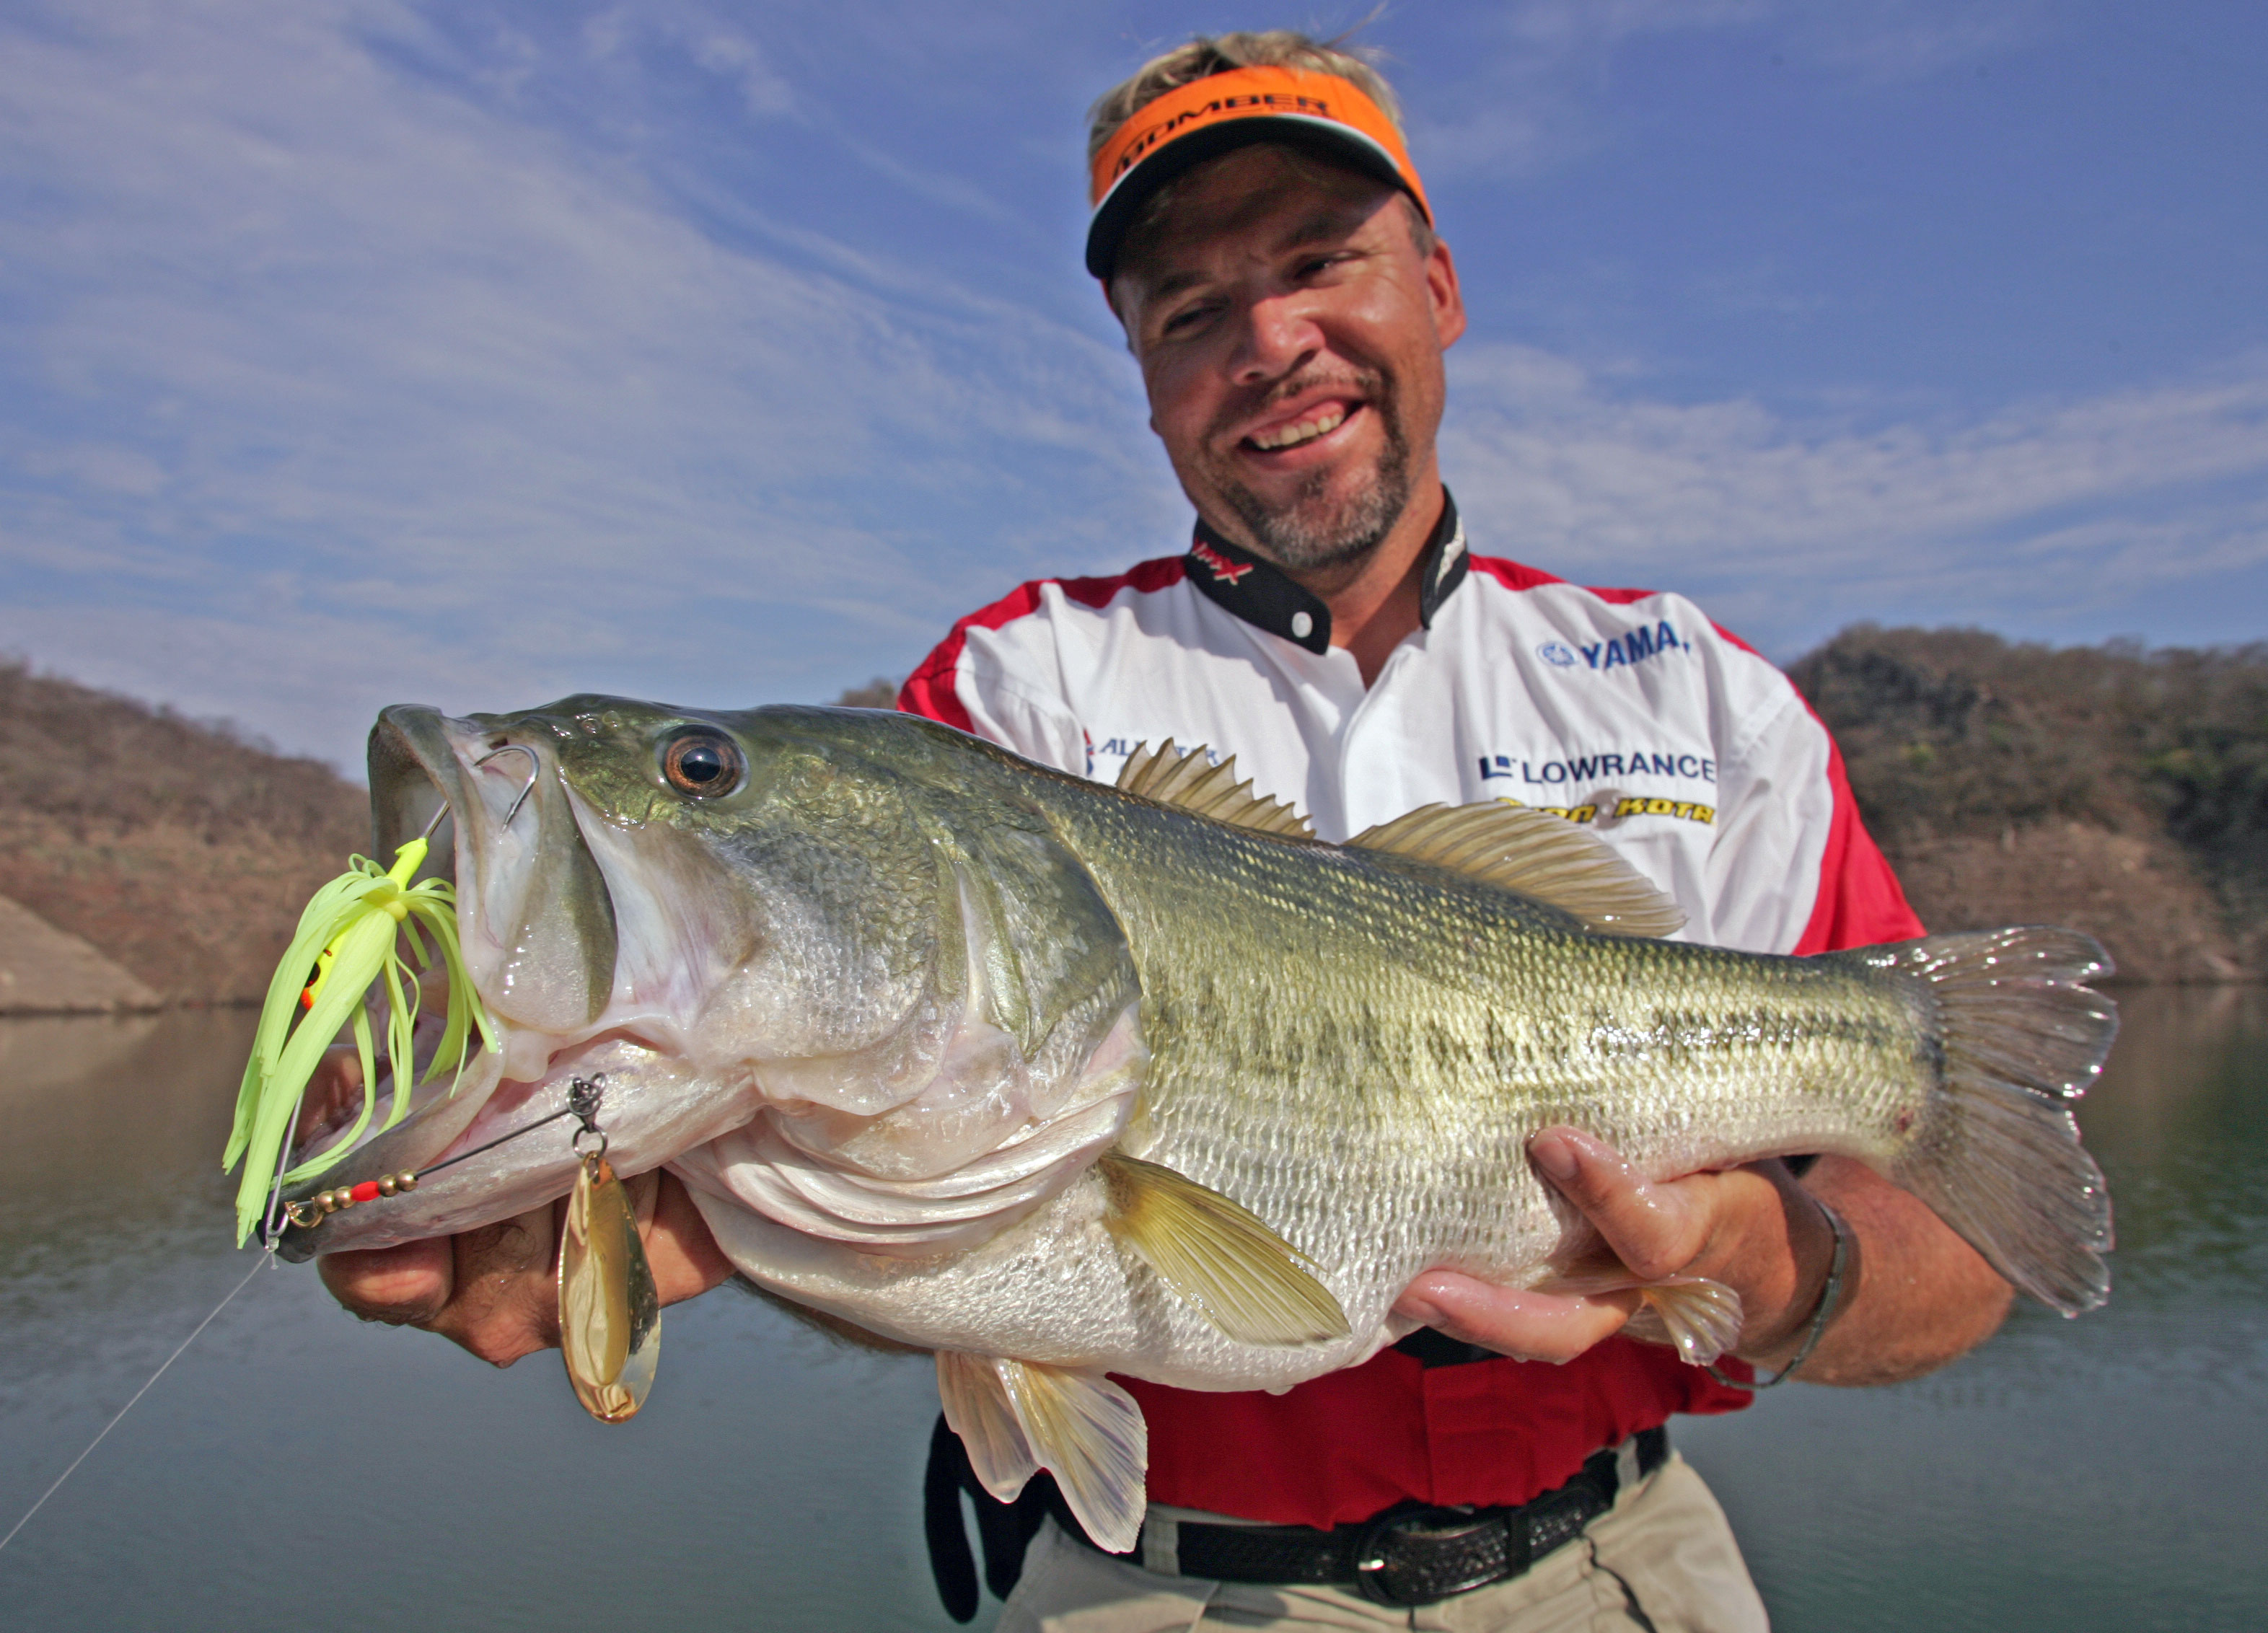 FISHING LOVERS) Texas-Rigs-for-Bass-Fishing-Leaders -with-Weights-Hooks-Rigged-Line-Kit - Fishing